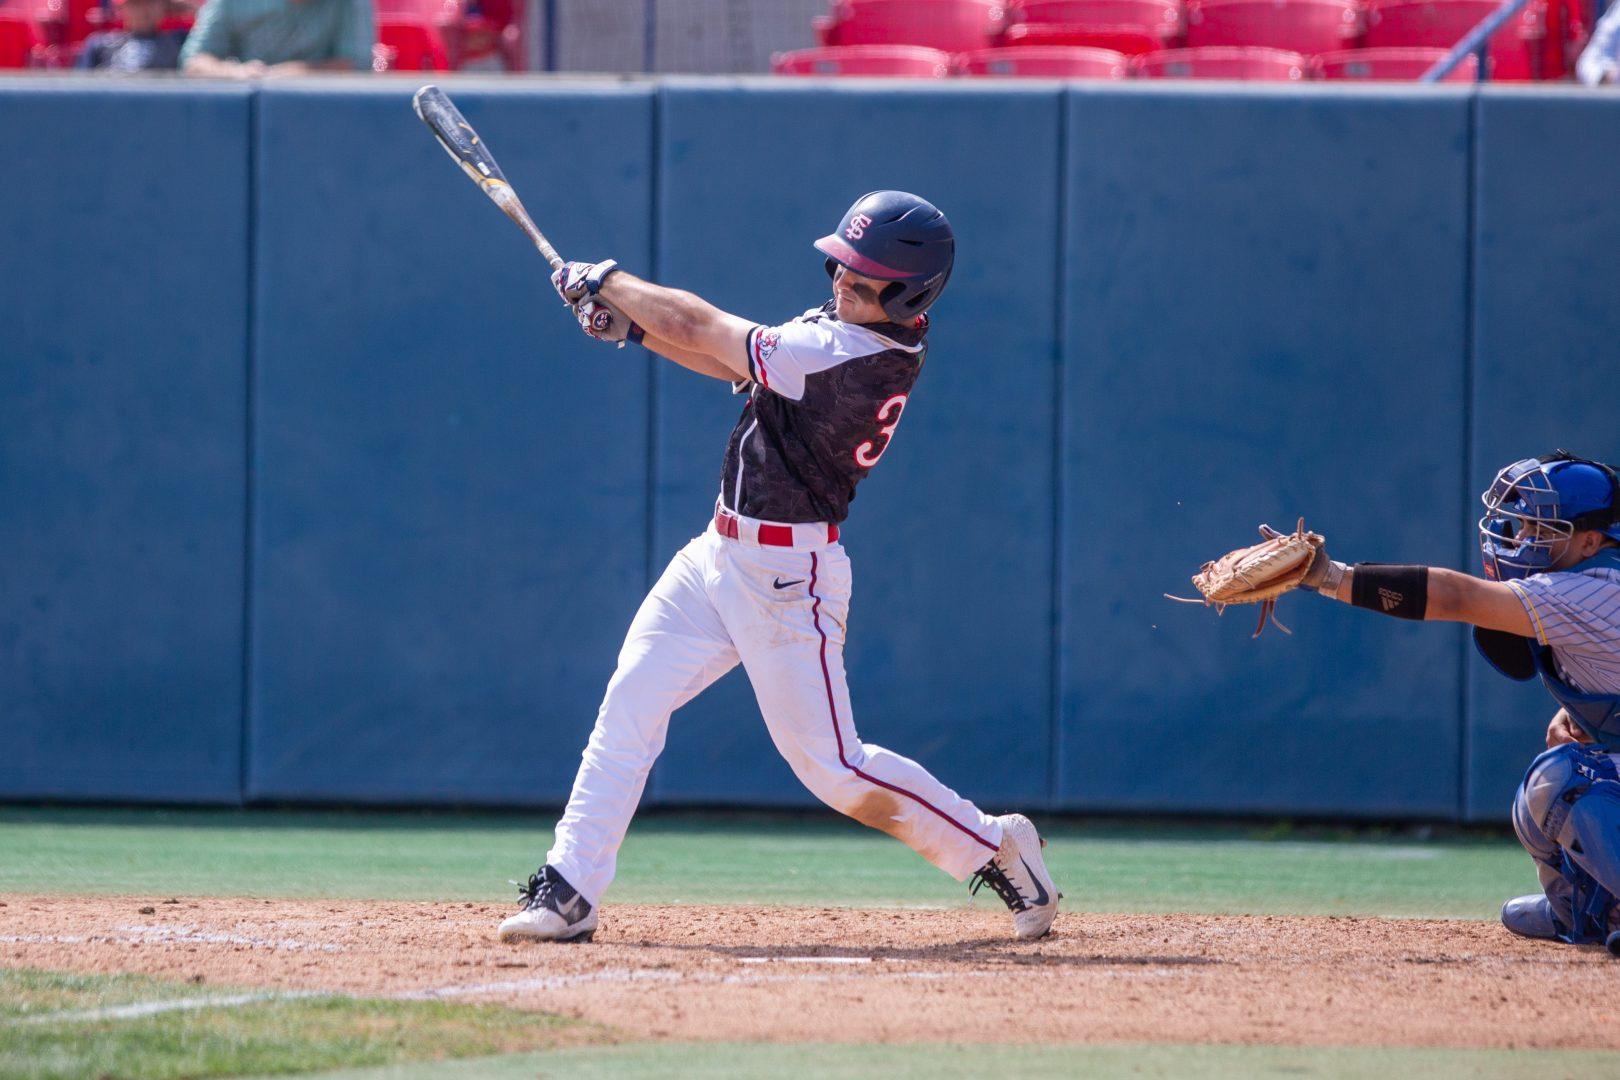 Fresno State senior Zach Ashford attempts to get a hit during the Bulldogs’ 7-5 loss to
San Jose State at Peter Beiden Field at Bob Bennett Stadium on March 24, 2019. (Jose Romo
Jr./The Collegian).